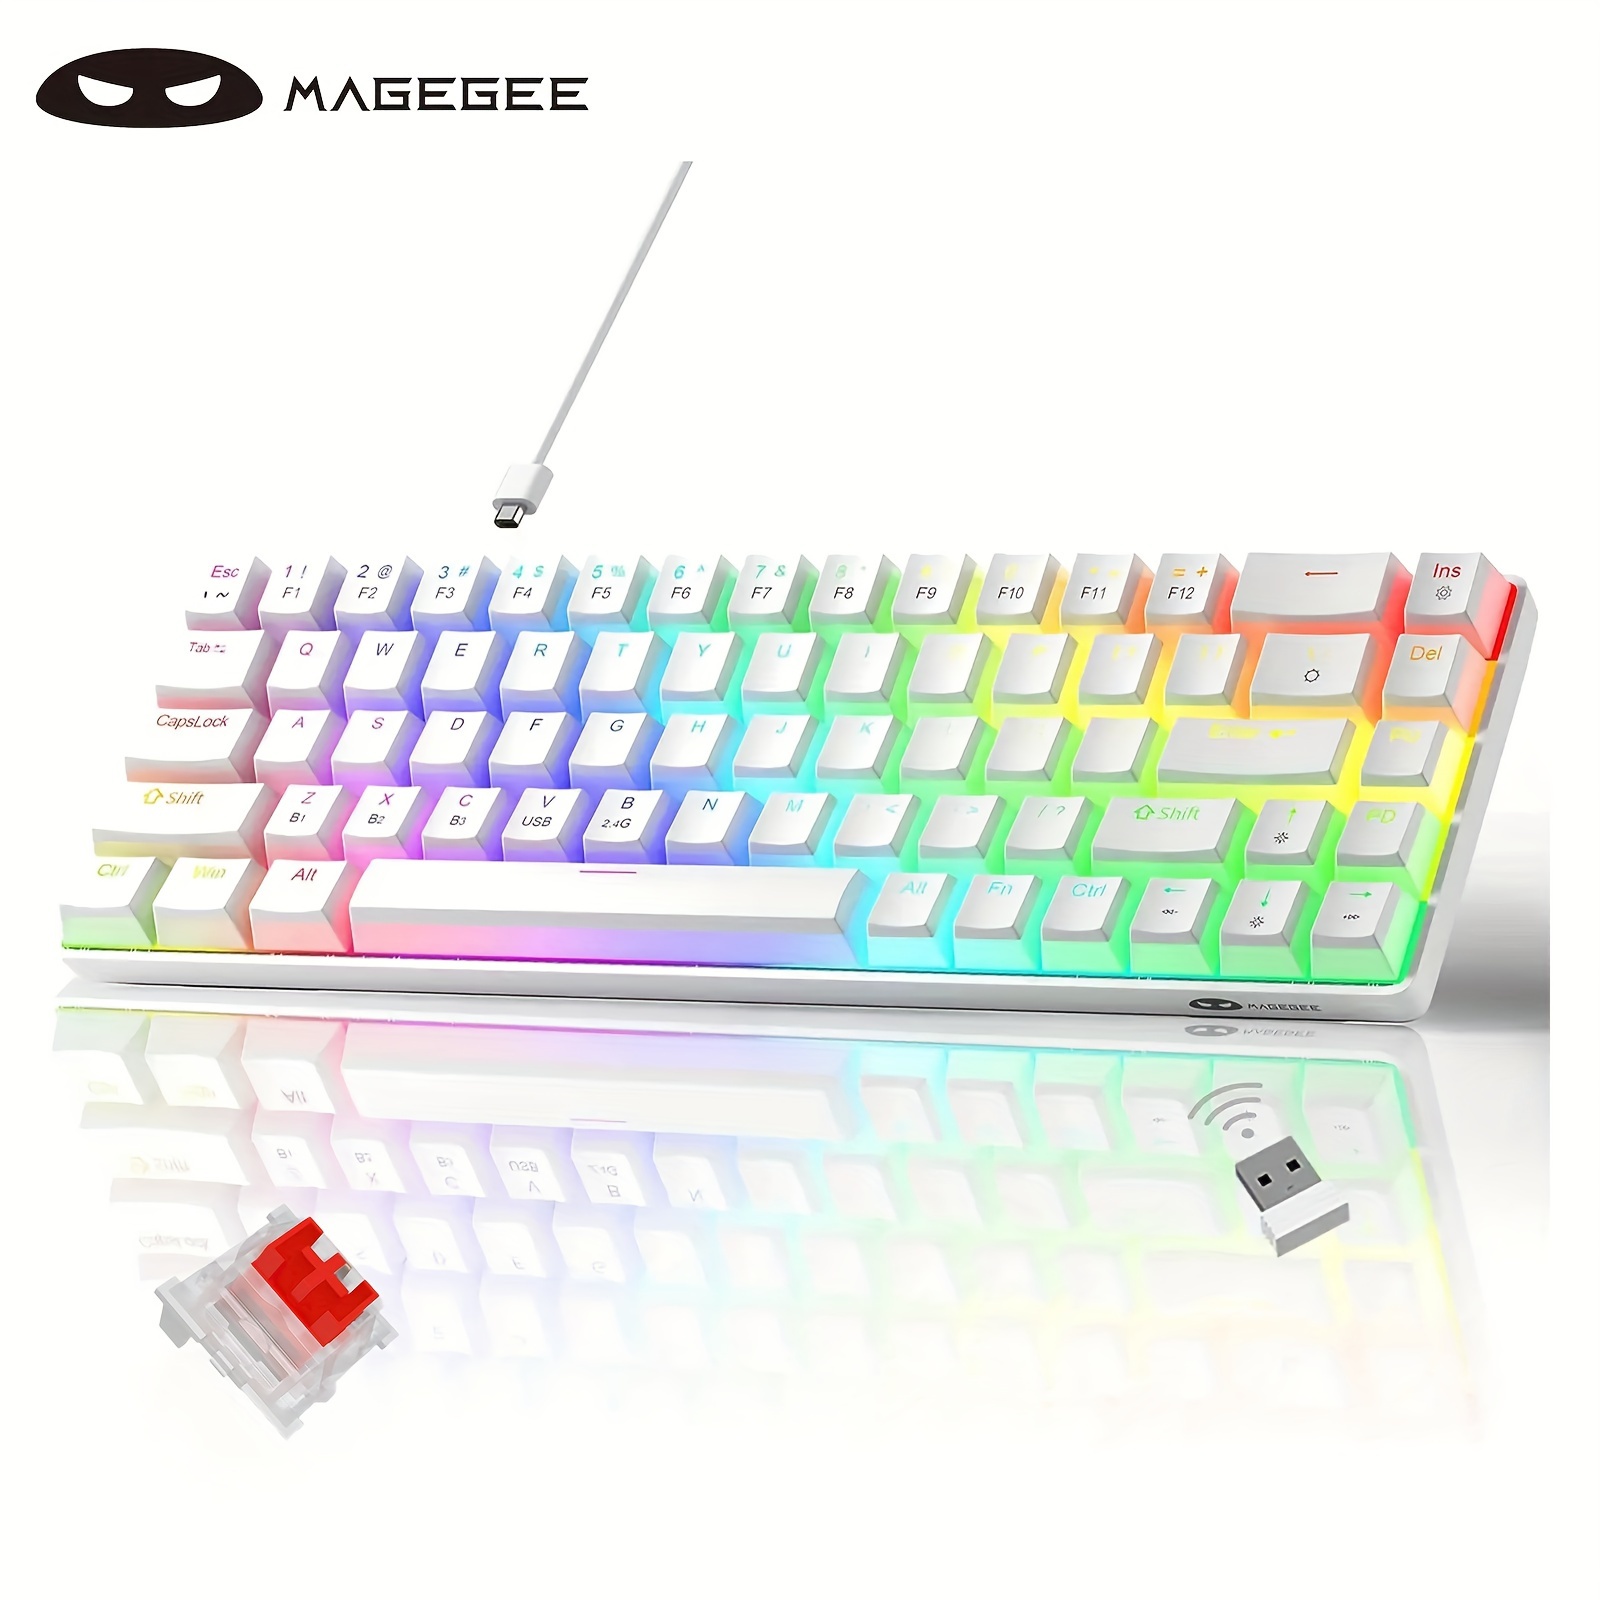 

60% Wireless Mechanical Keyboard, 2.4g/bt5.0/usb-c Triple Mode Pbt Pudding Keycaps Rgb Backlit Keyboard, Compact 68 Keys Mini Keyboard With Red Switch For Pc Laptop Smartphone